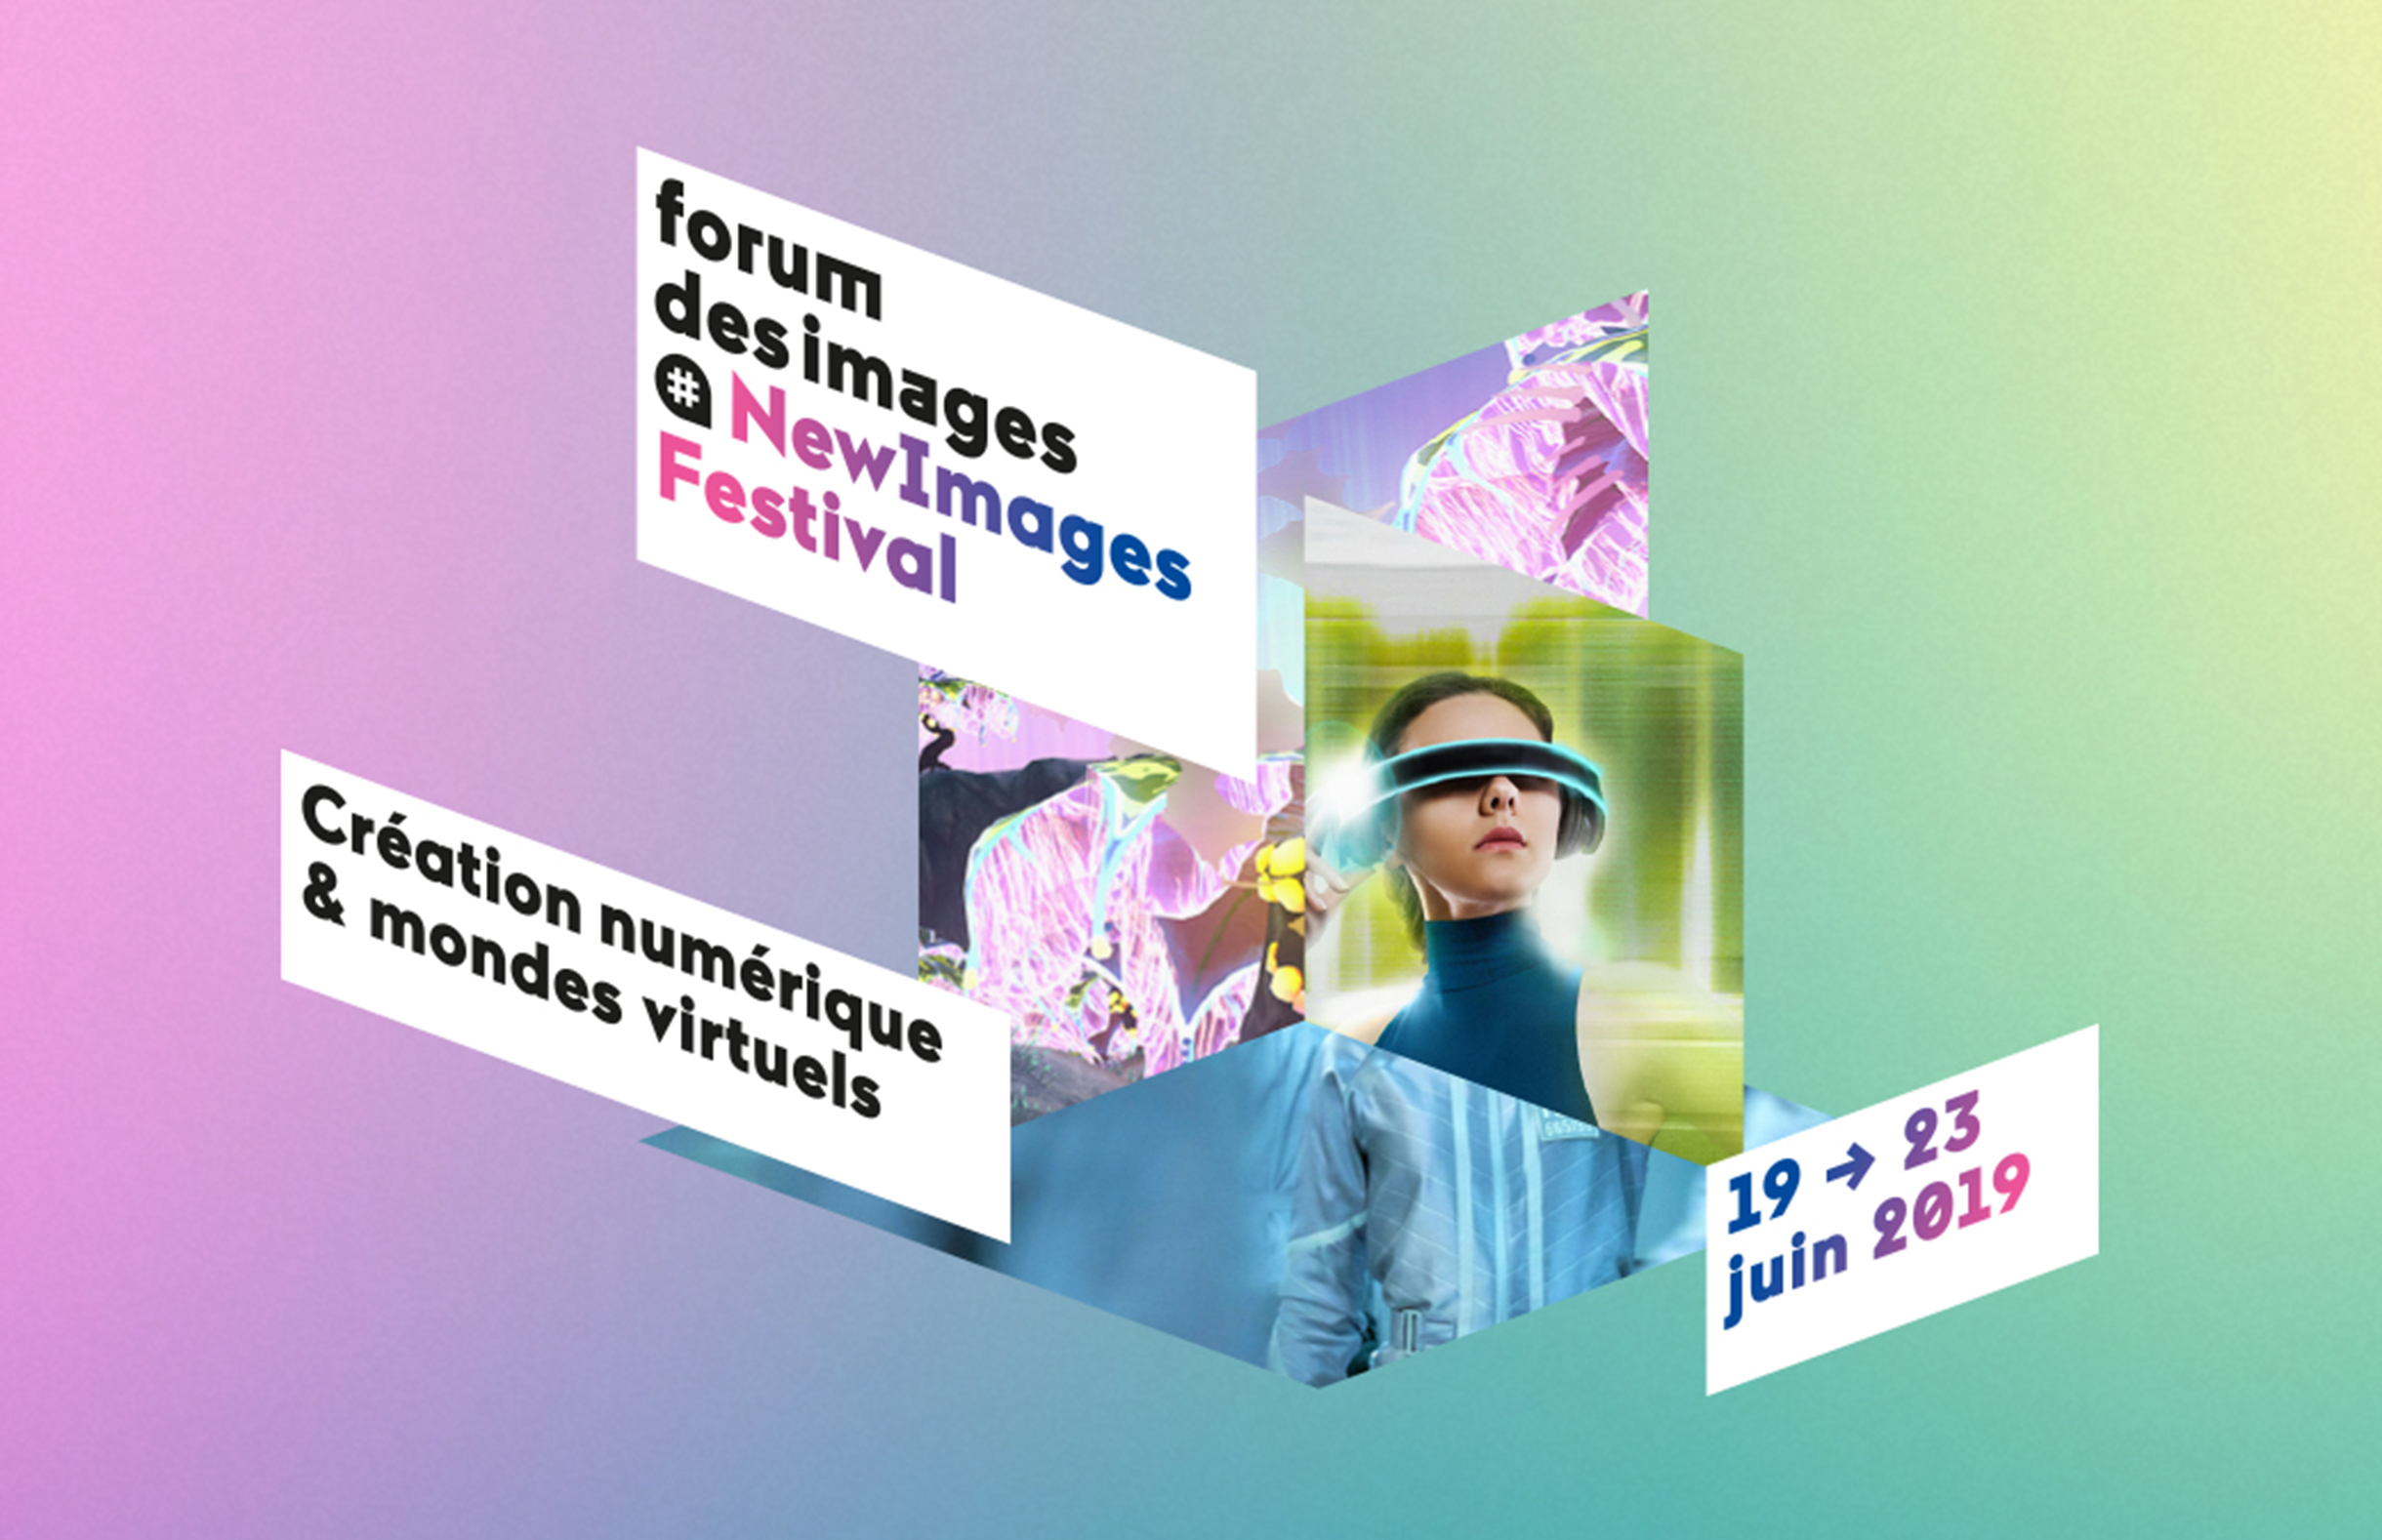 New exhibitions: museums in the age of digital transformation